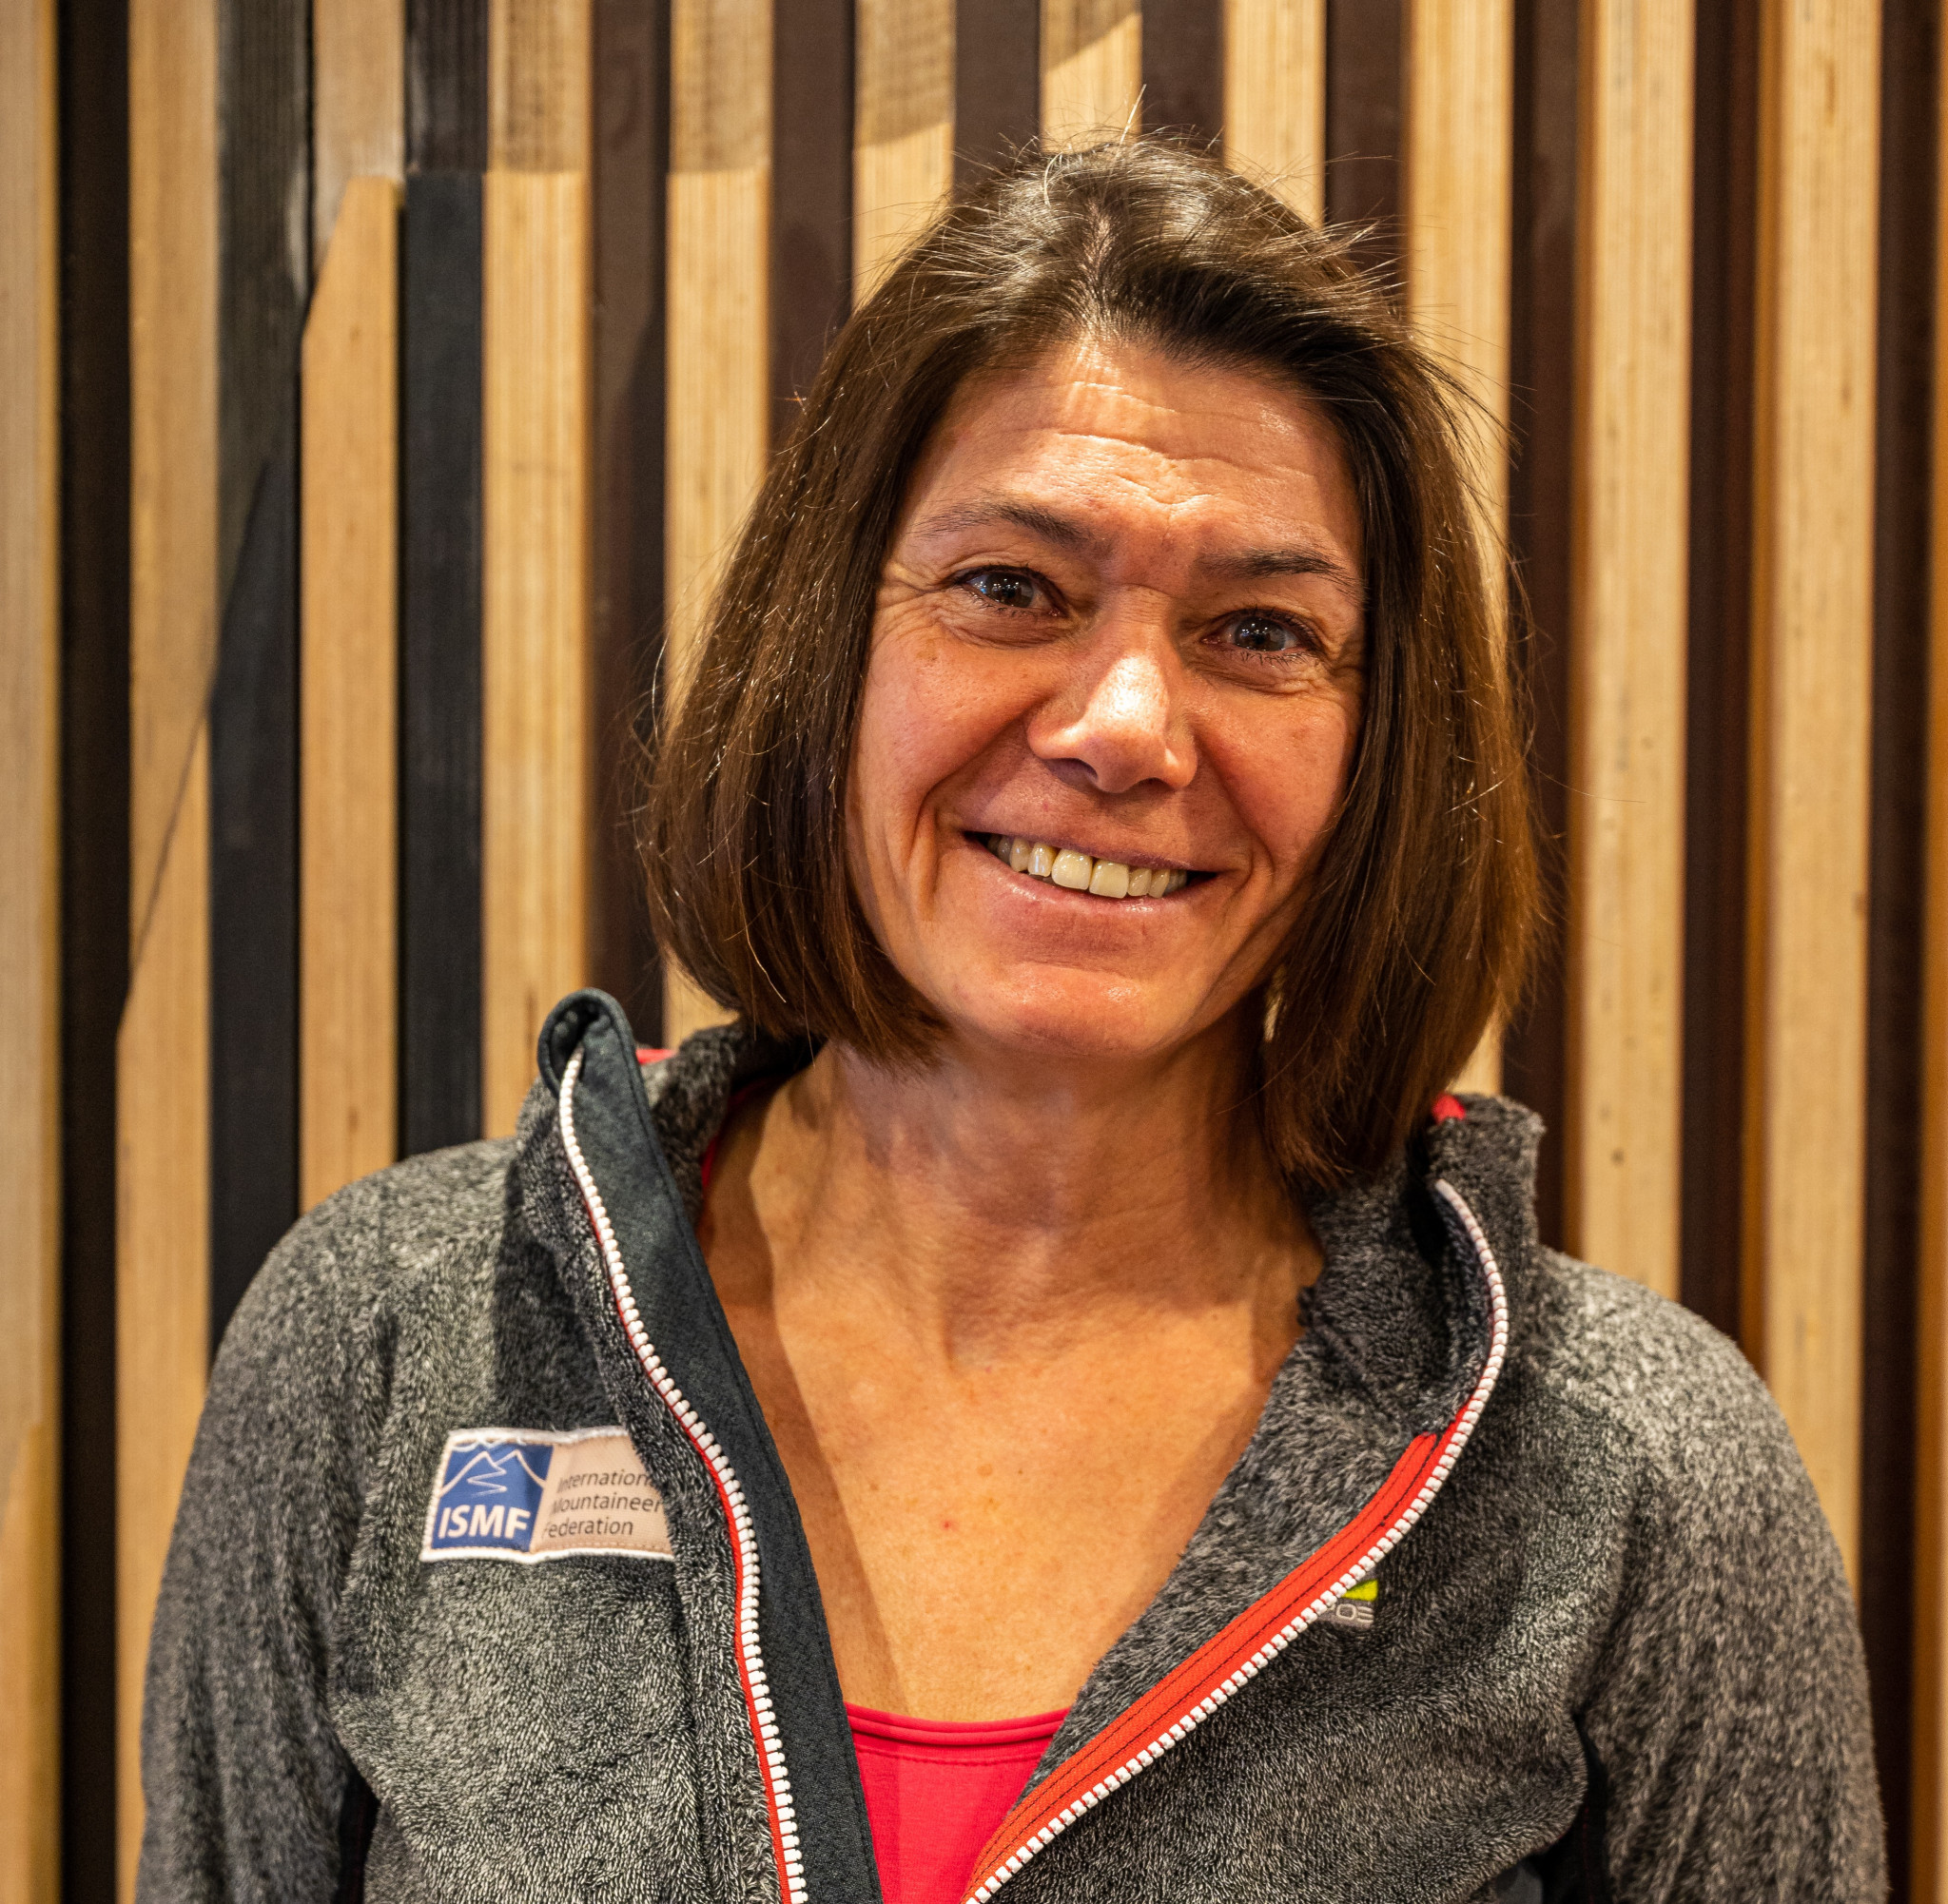 Regula Meier has been re-elected as President of the International Ski Mountaineering Federation ©ISMF